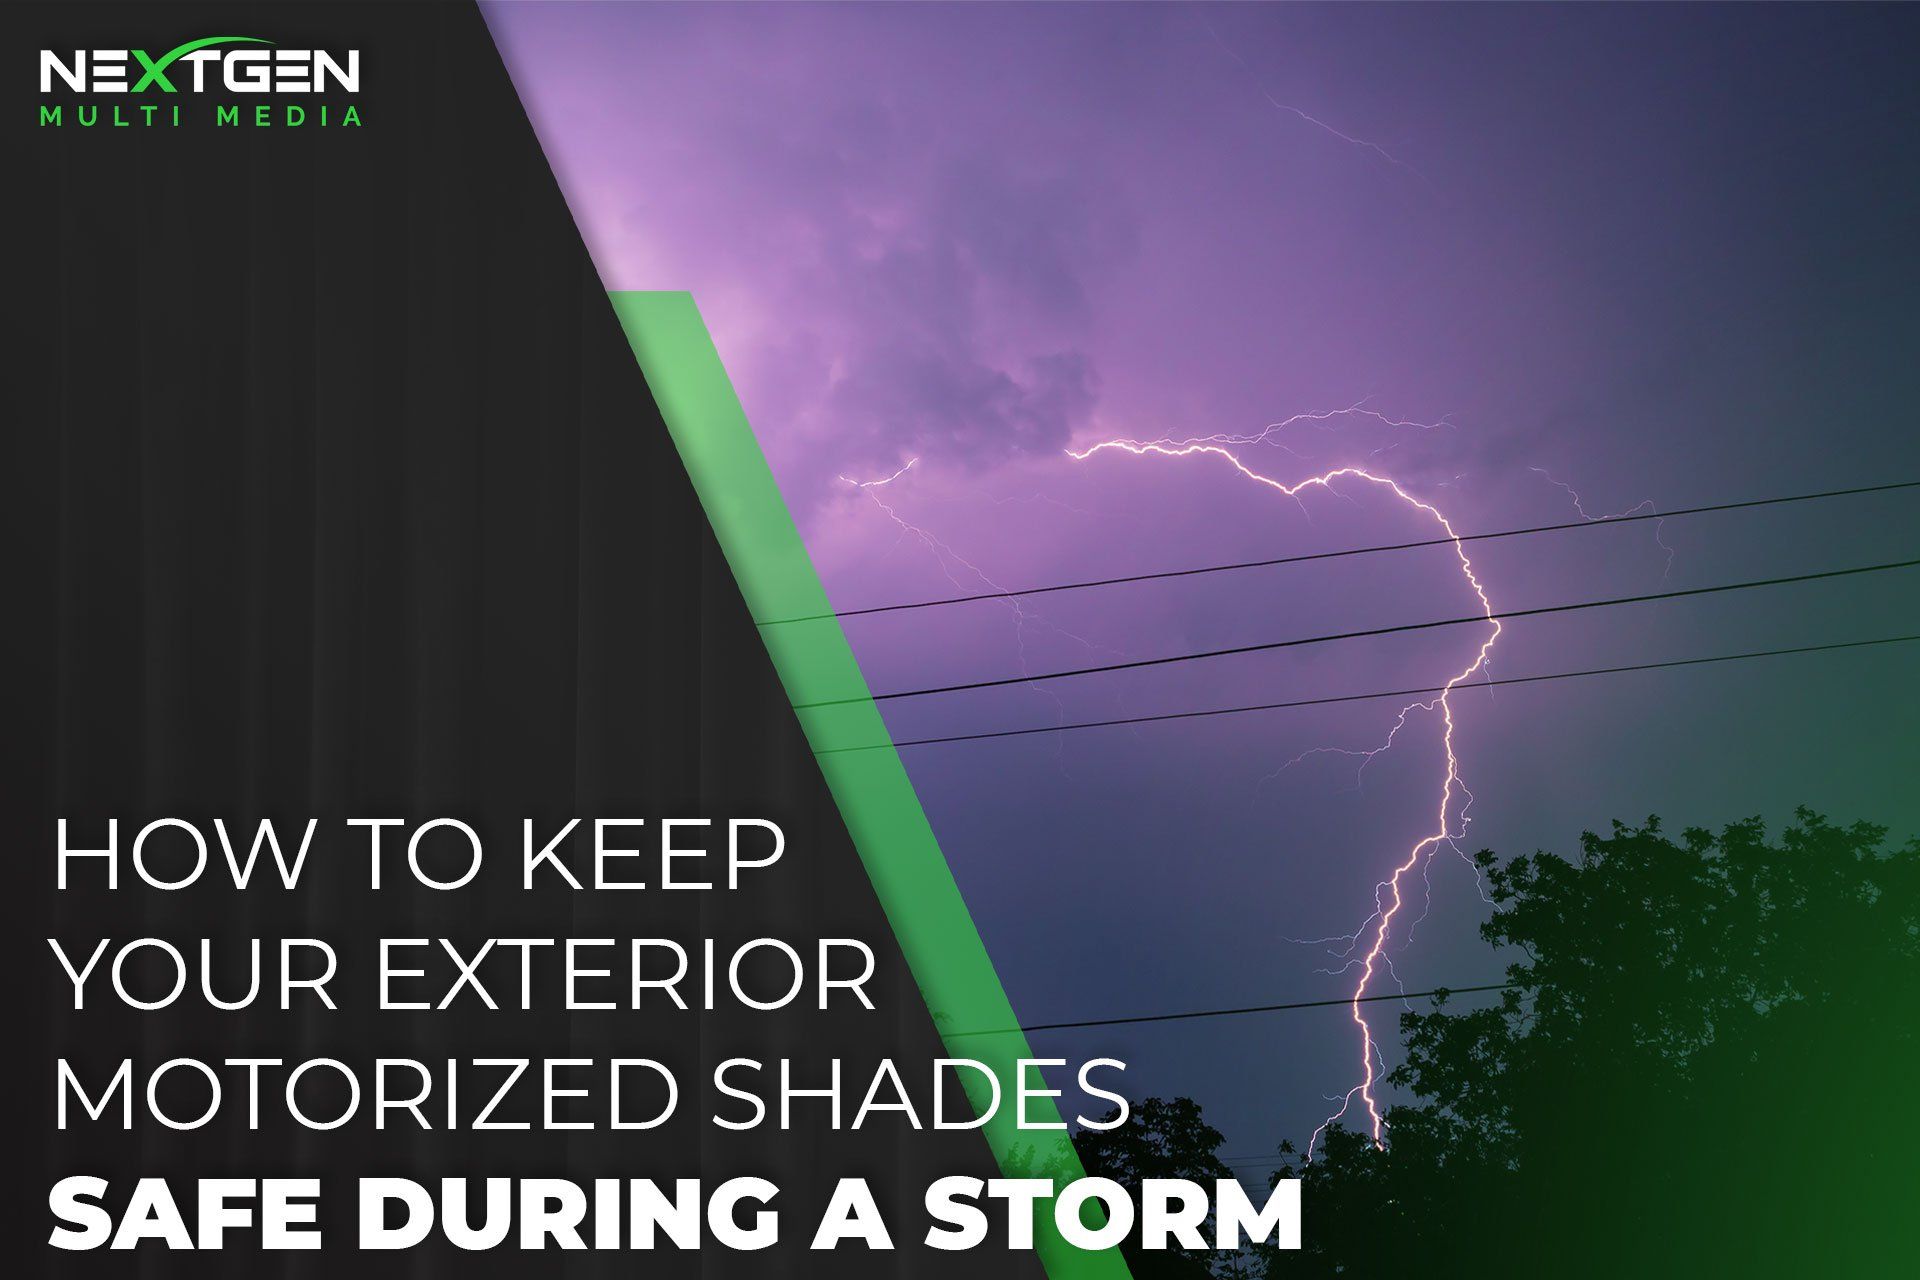 How to Keep Your Exterior Motorized Shades Safe During a Storm | Nextgen Multi Media